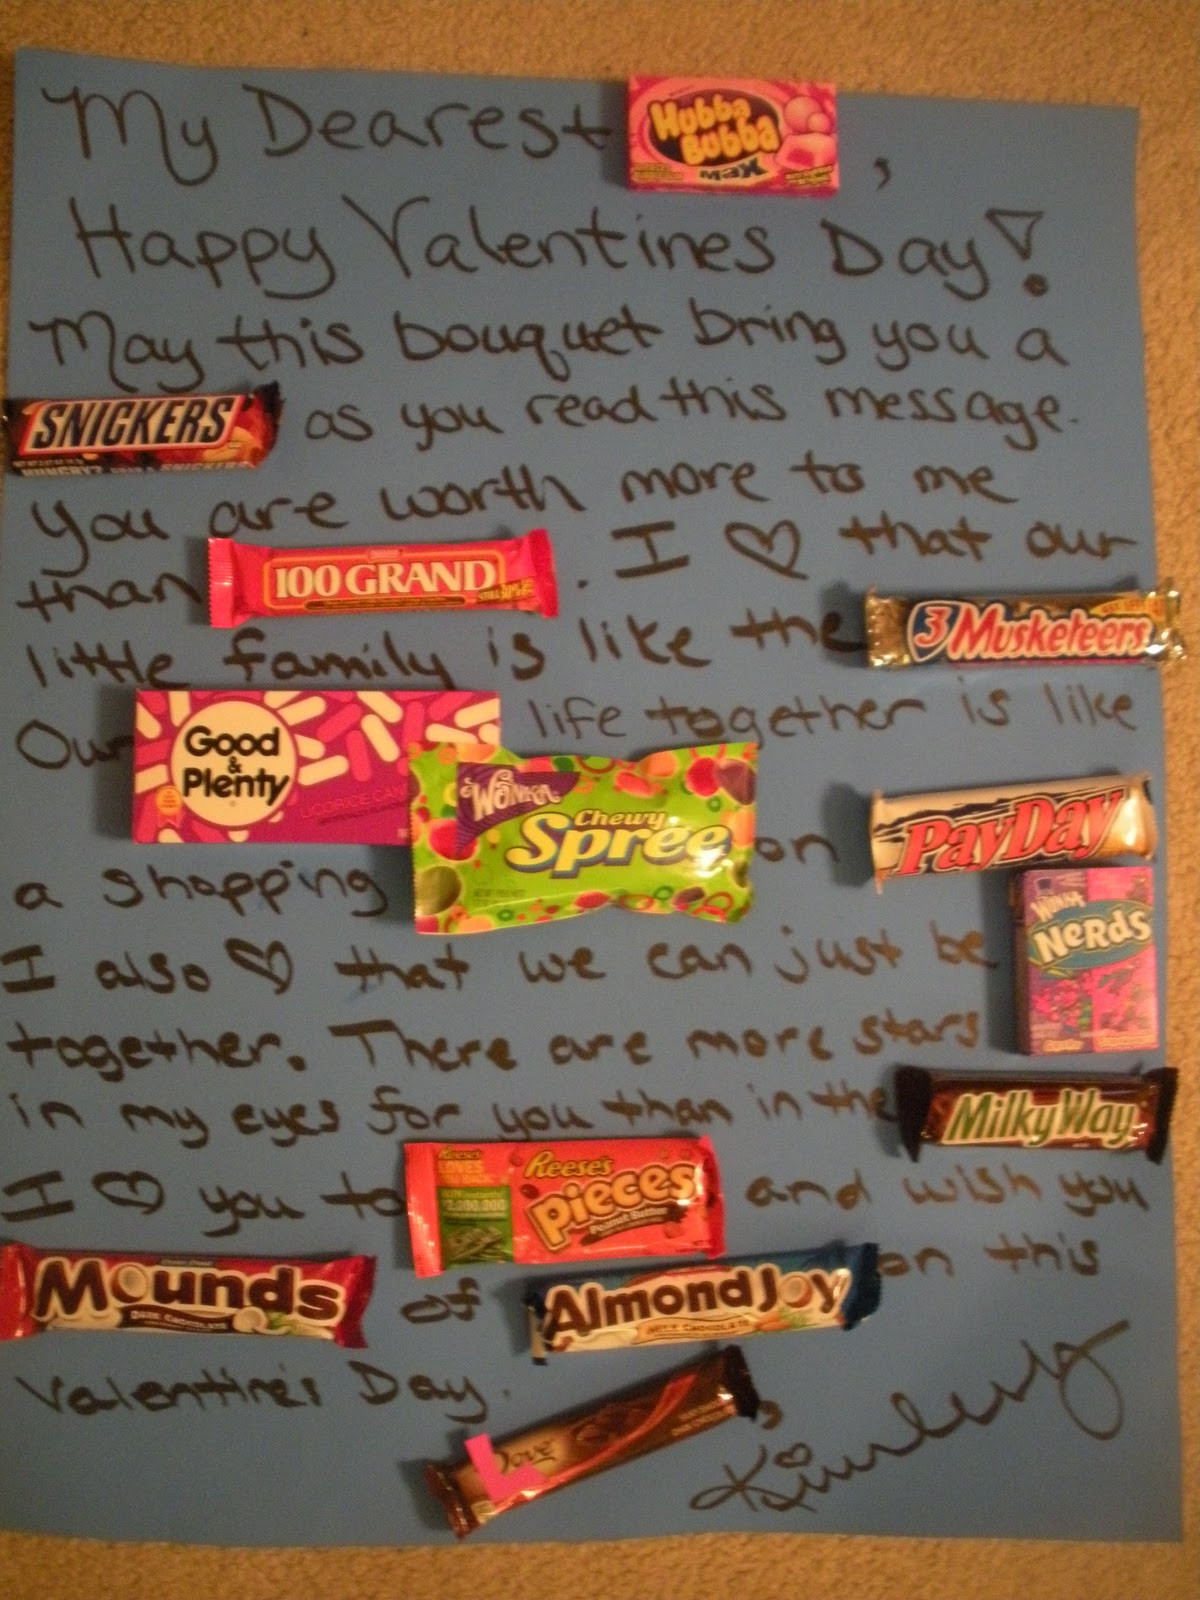 Valentines Day Candy Gram
 Wel e to the Mad House Valentine Candy Grams